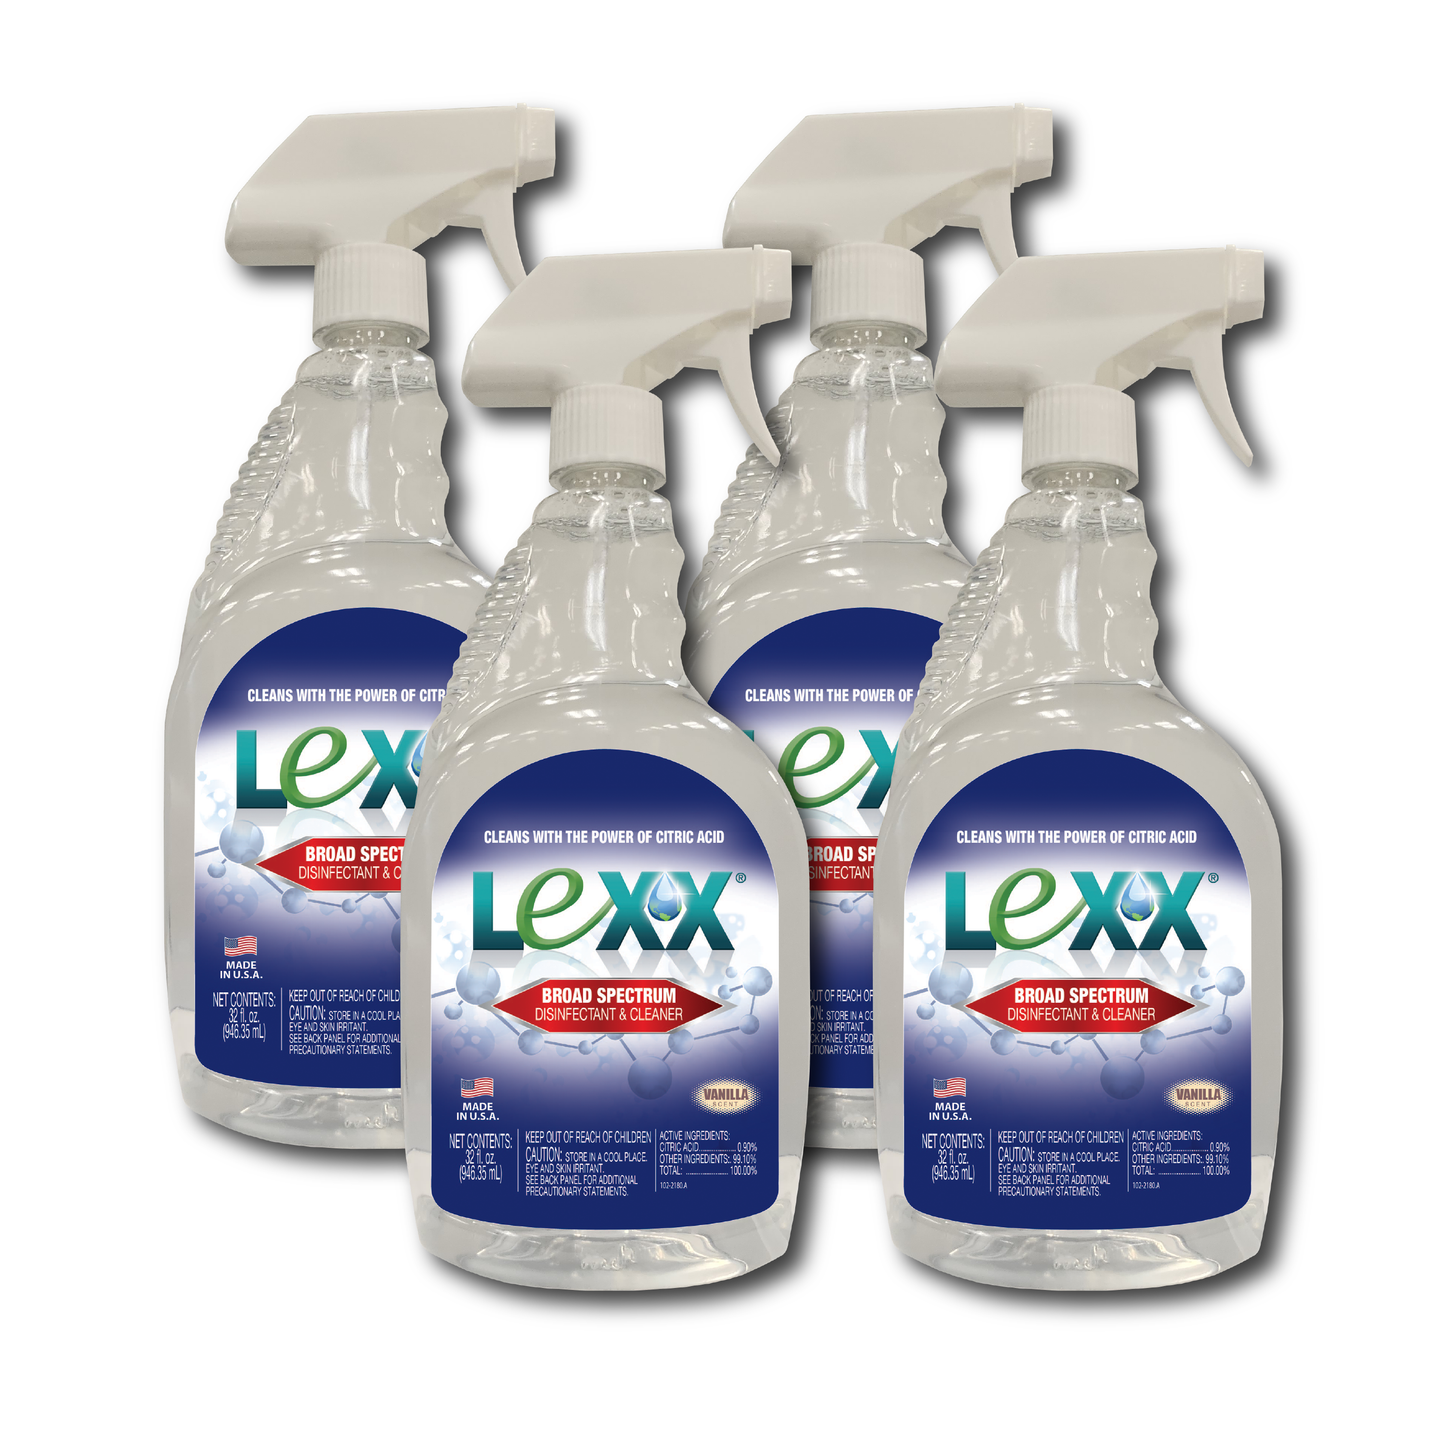 LEXX Liquid Disinfectant and Cleaner Ready to Use Solution (RTU) - Vanilla Scented (Case of 4)